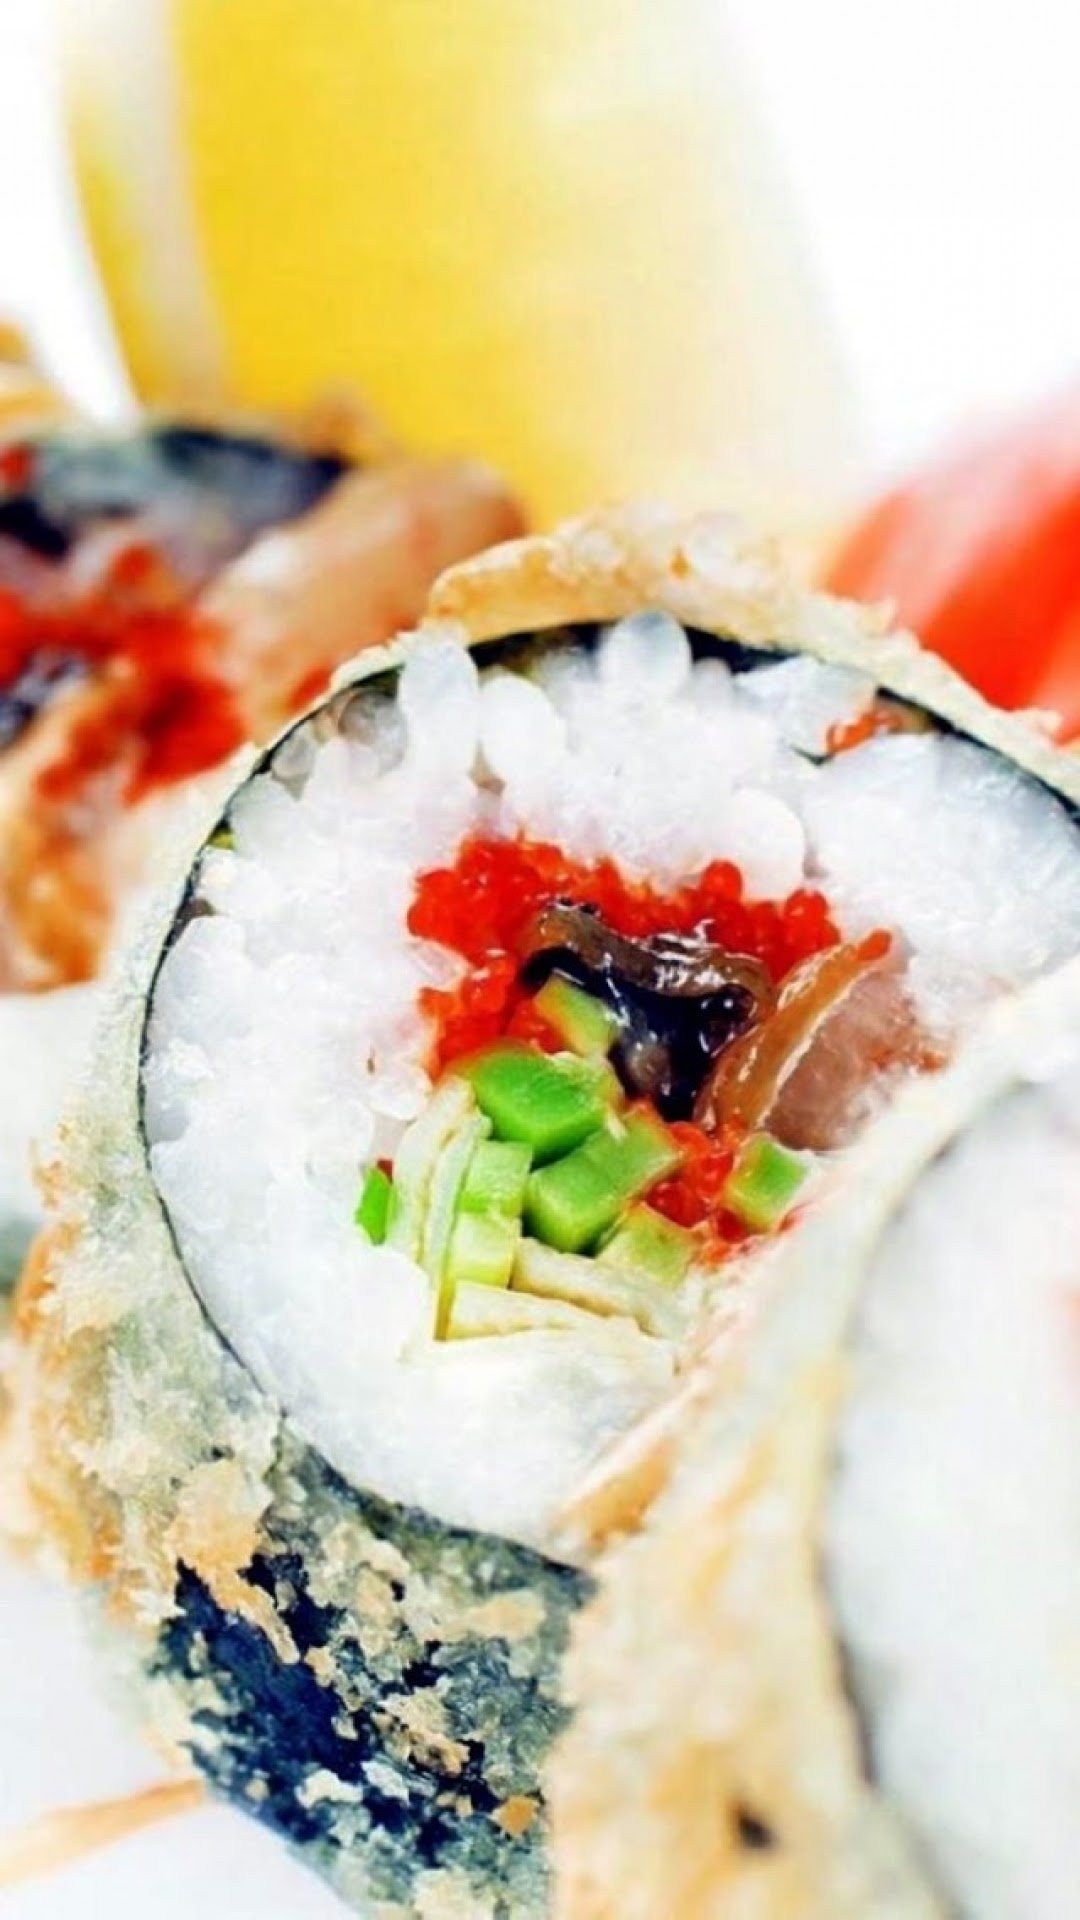 Sushi: A seaweed wrapped around cooked rice, raw or cooked fish, vegetables. 1080x1920 Full HD Wallpaper.